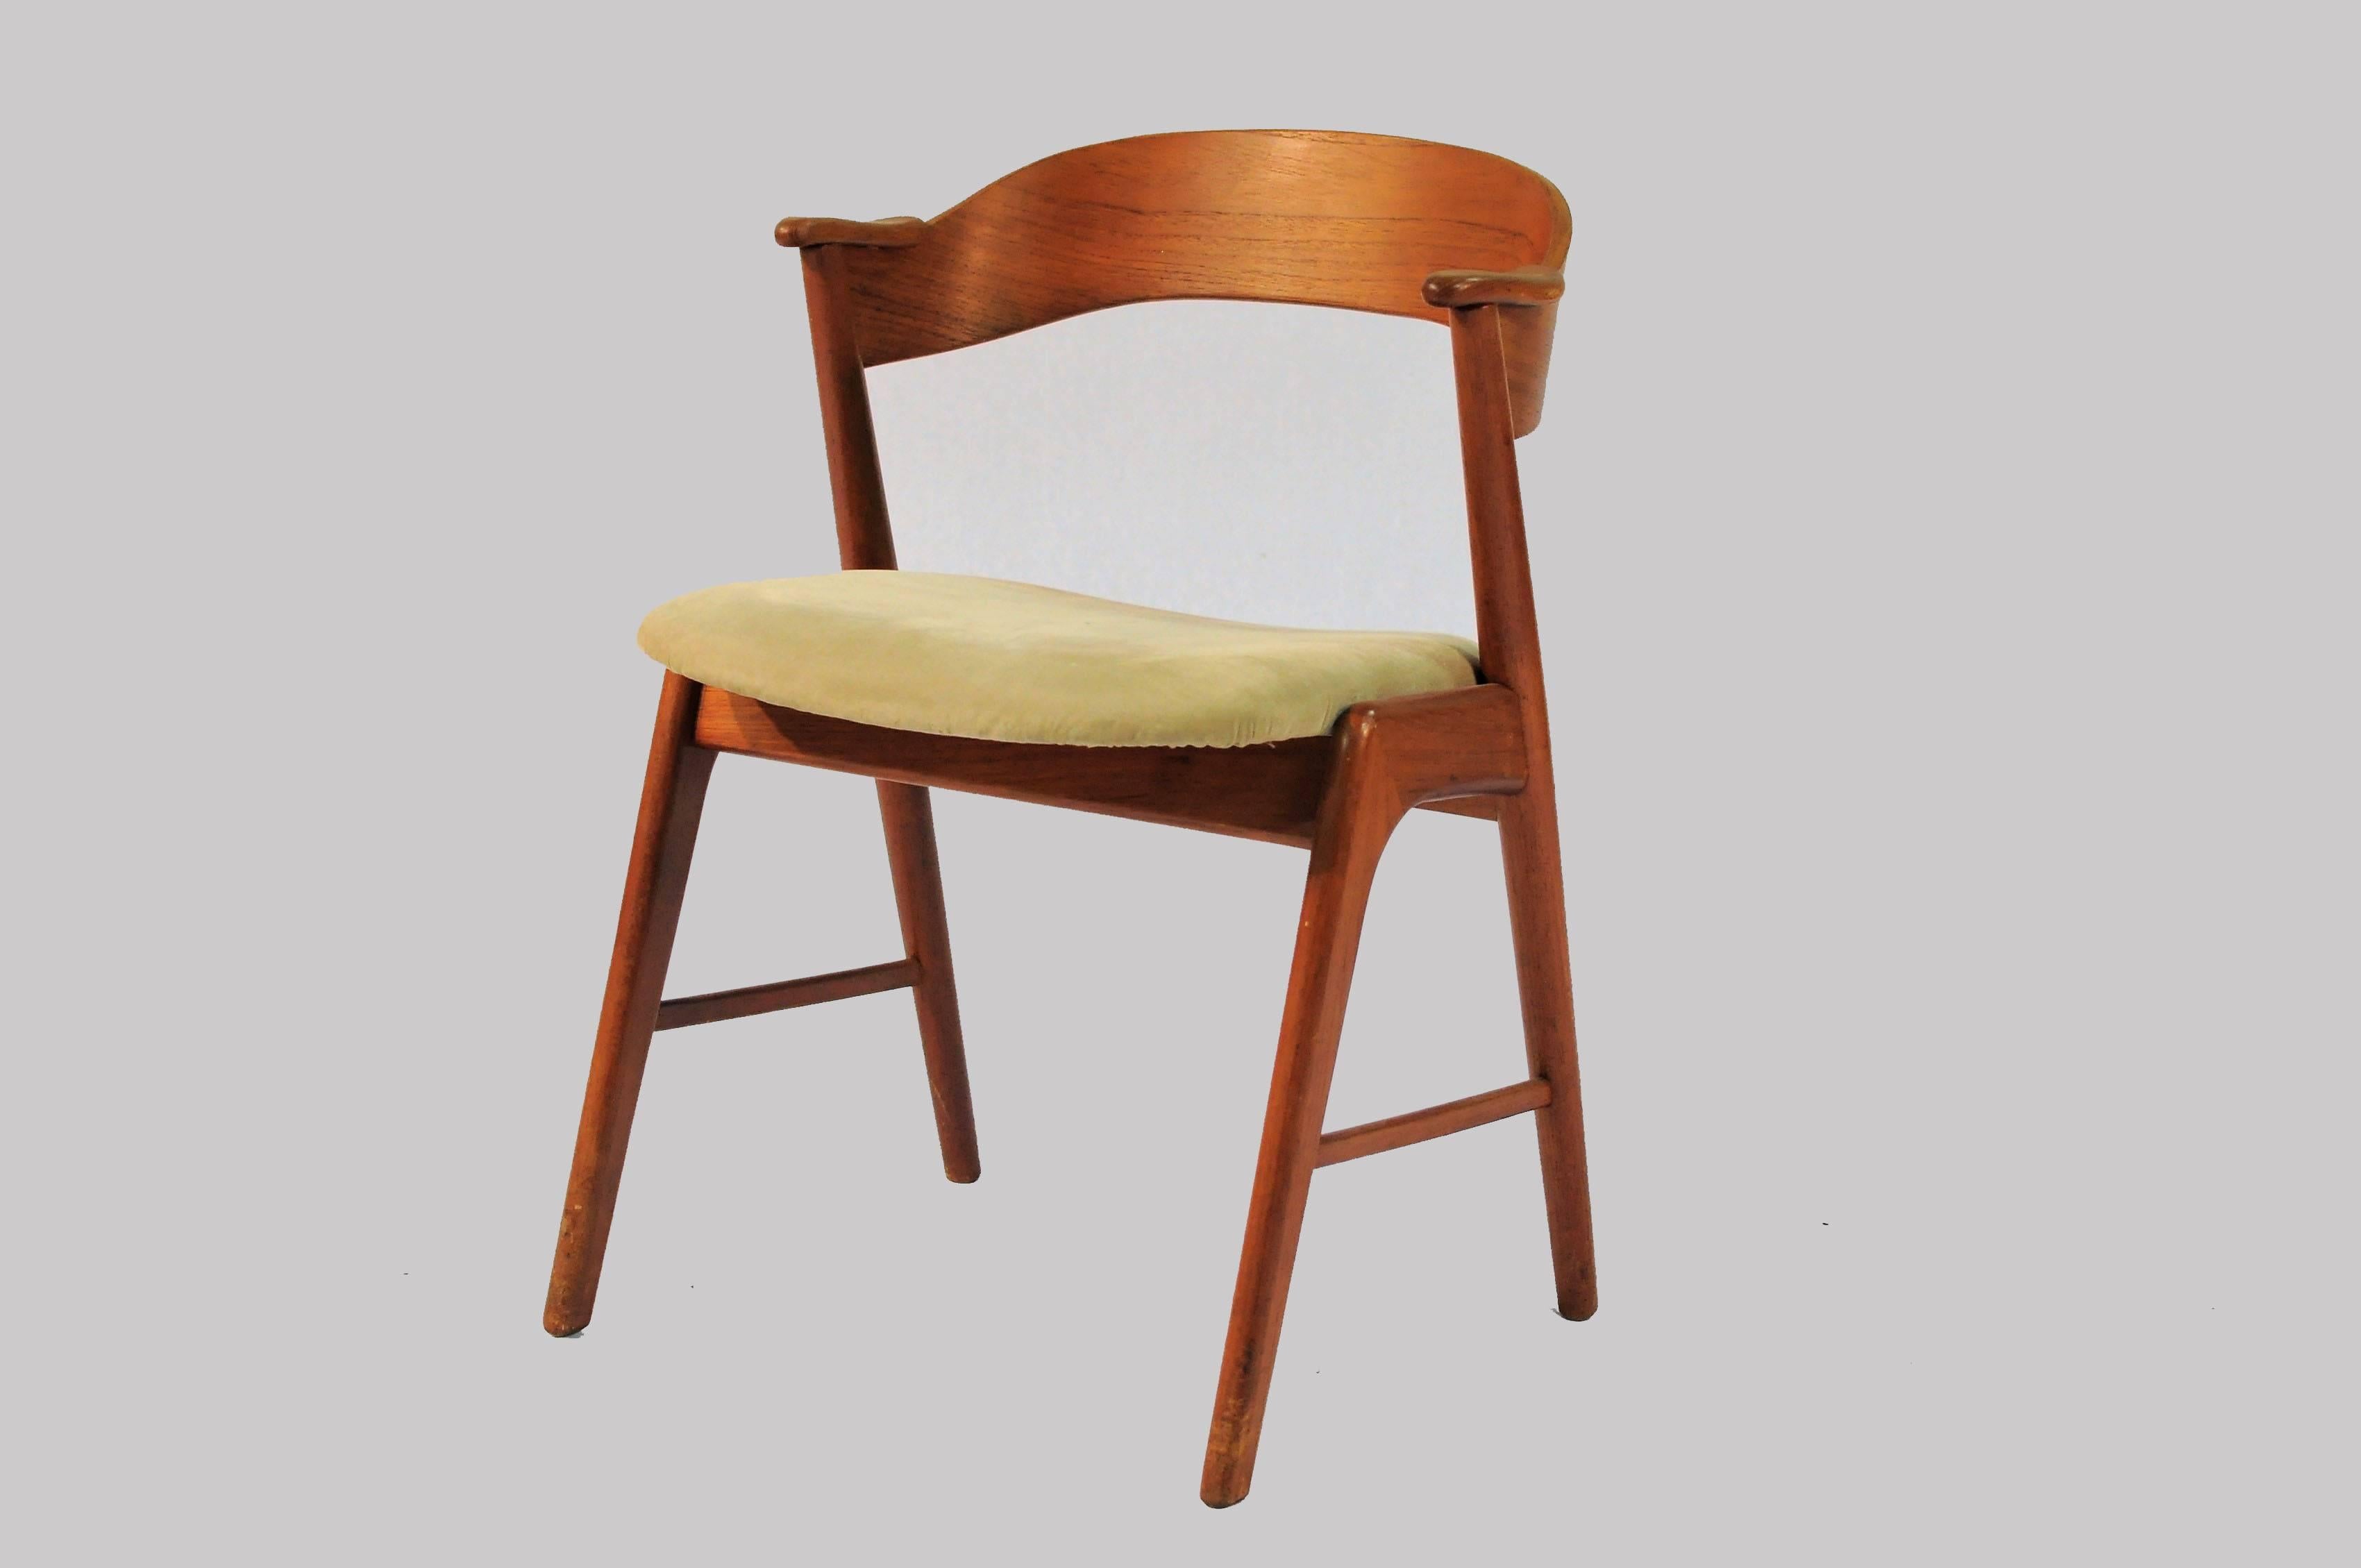 Set of Six Danish dining chairs in teak with curved backrests and elegant frames manufactored by Korup Stolefabrik. The chairs are commonly known as model 32 and by many attributed to Kai Kristiansen - though he himself denied having designed